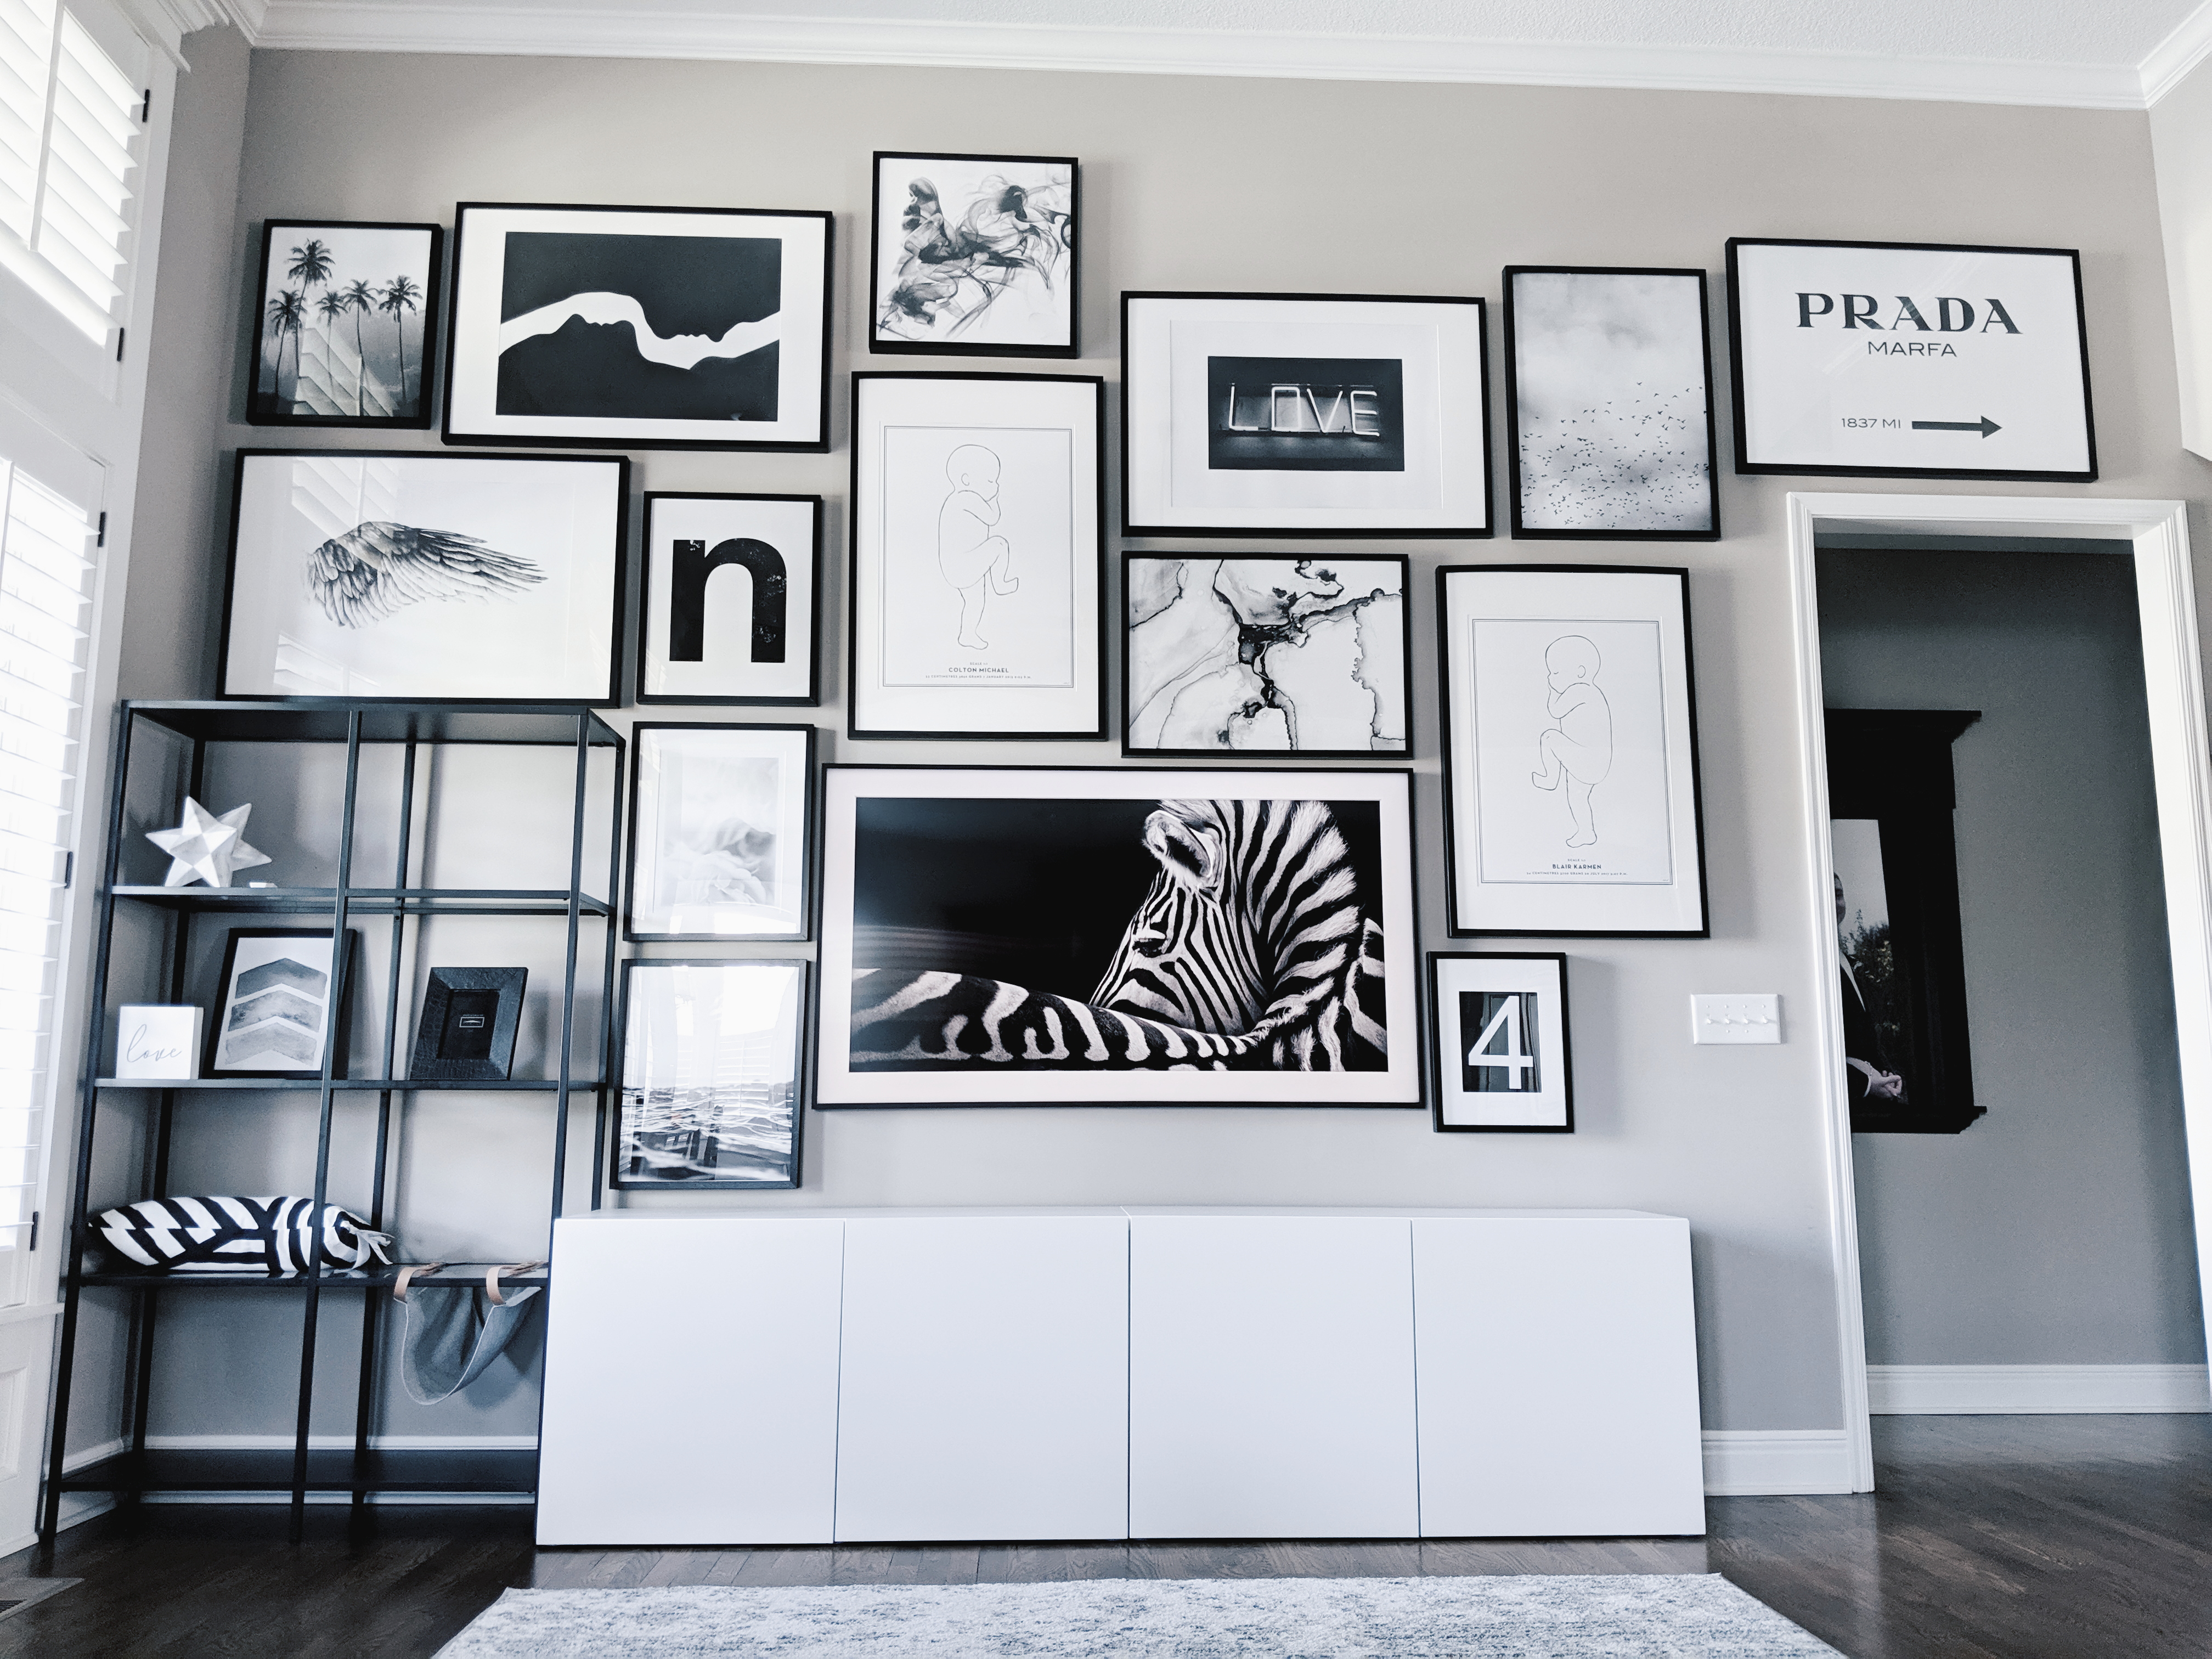 Living Room Gallery Wall Ideas: Looking for gallery wall ideas? This black and white gallery wall is a total showstopper. This is one of the best gallery walls I've ever seen! Includes Desenio posters, Samsung The Frame TV, Ikea Besta as a TV stand, Ikea Ribba frame gallery wall, Ikea Vittsjo shelves. #gallerywall #blackandwhite #monochrome